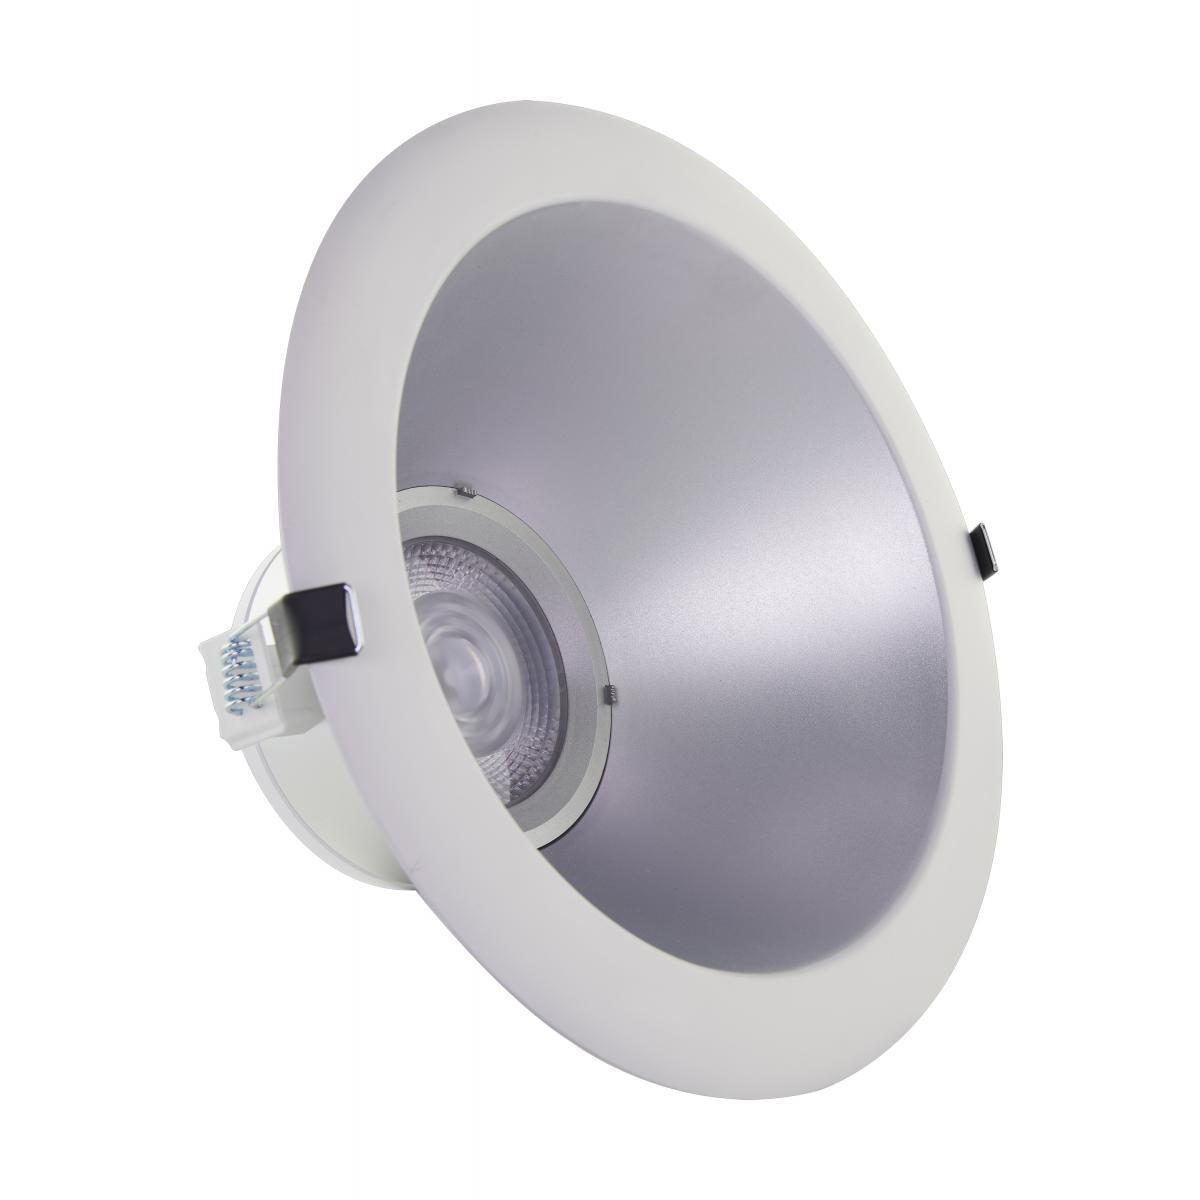 8 In. Commercial Canless LED Recessed Light, 32 Watt, 2450 Lumens, Selectable CCT, 2700K to 5000K, Silver Finish